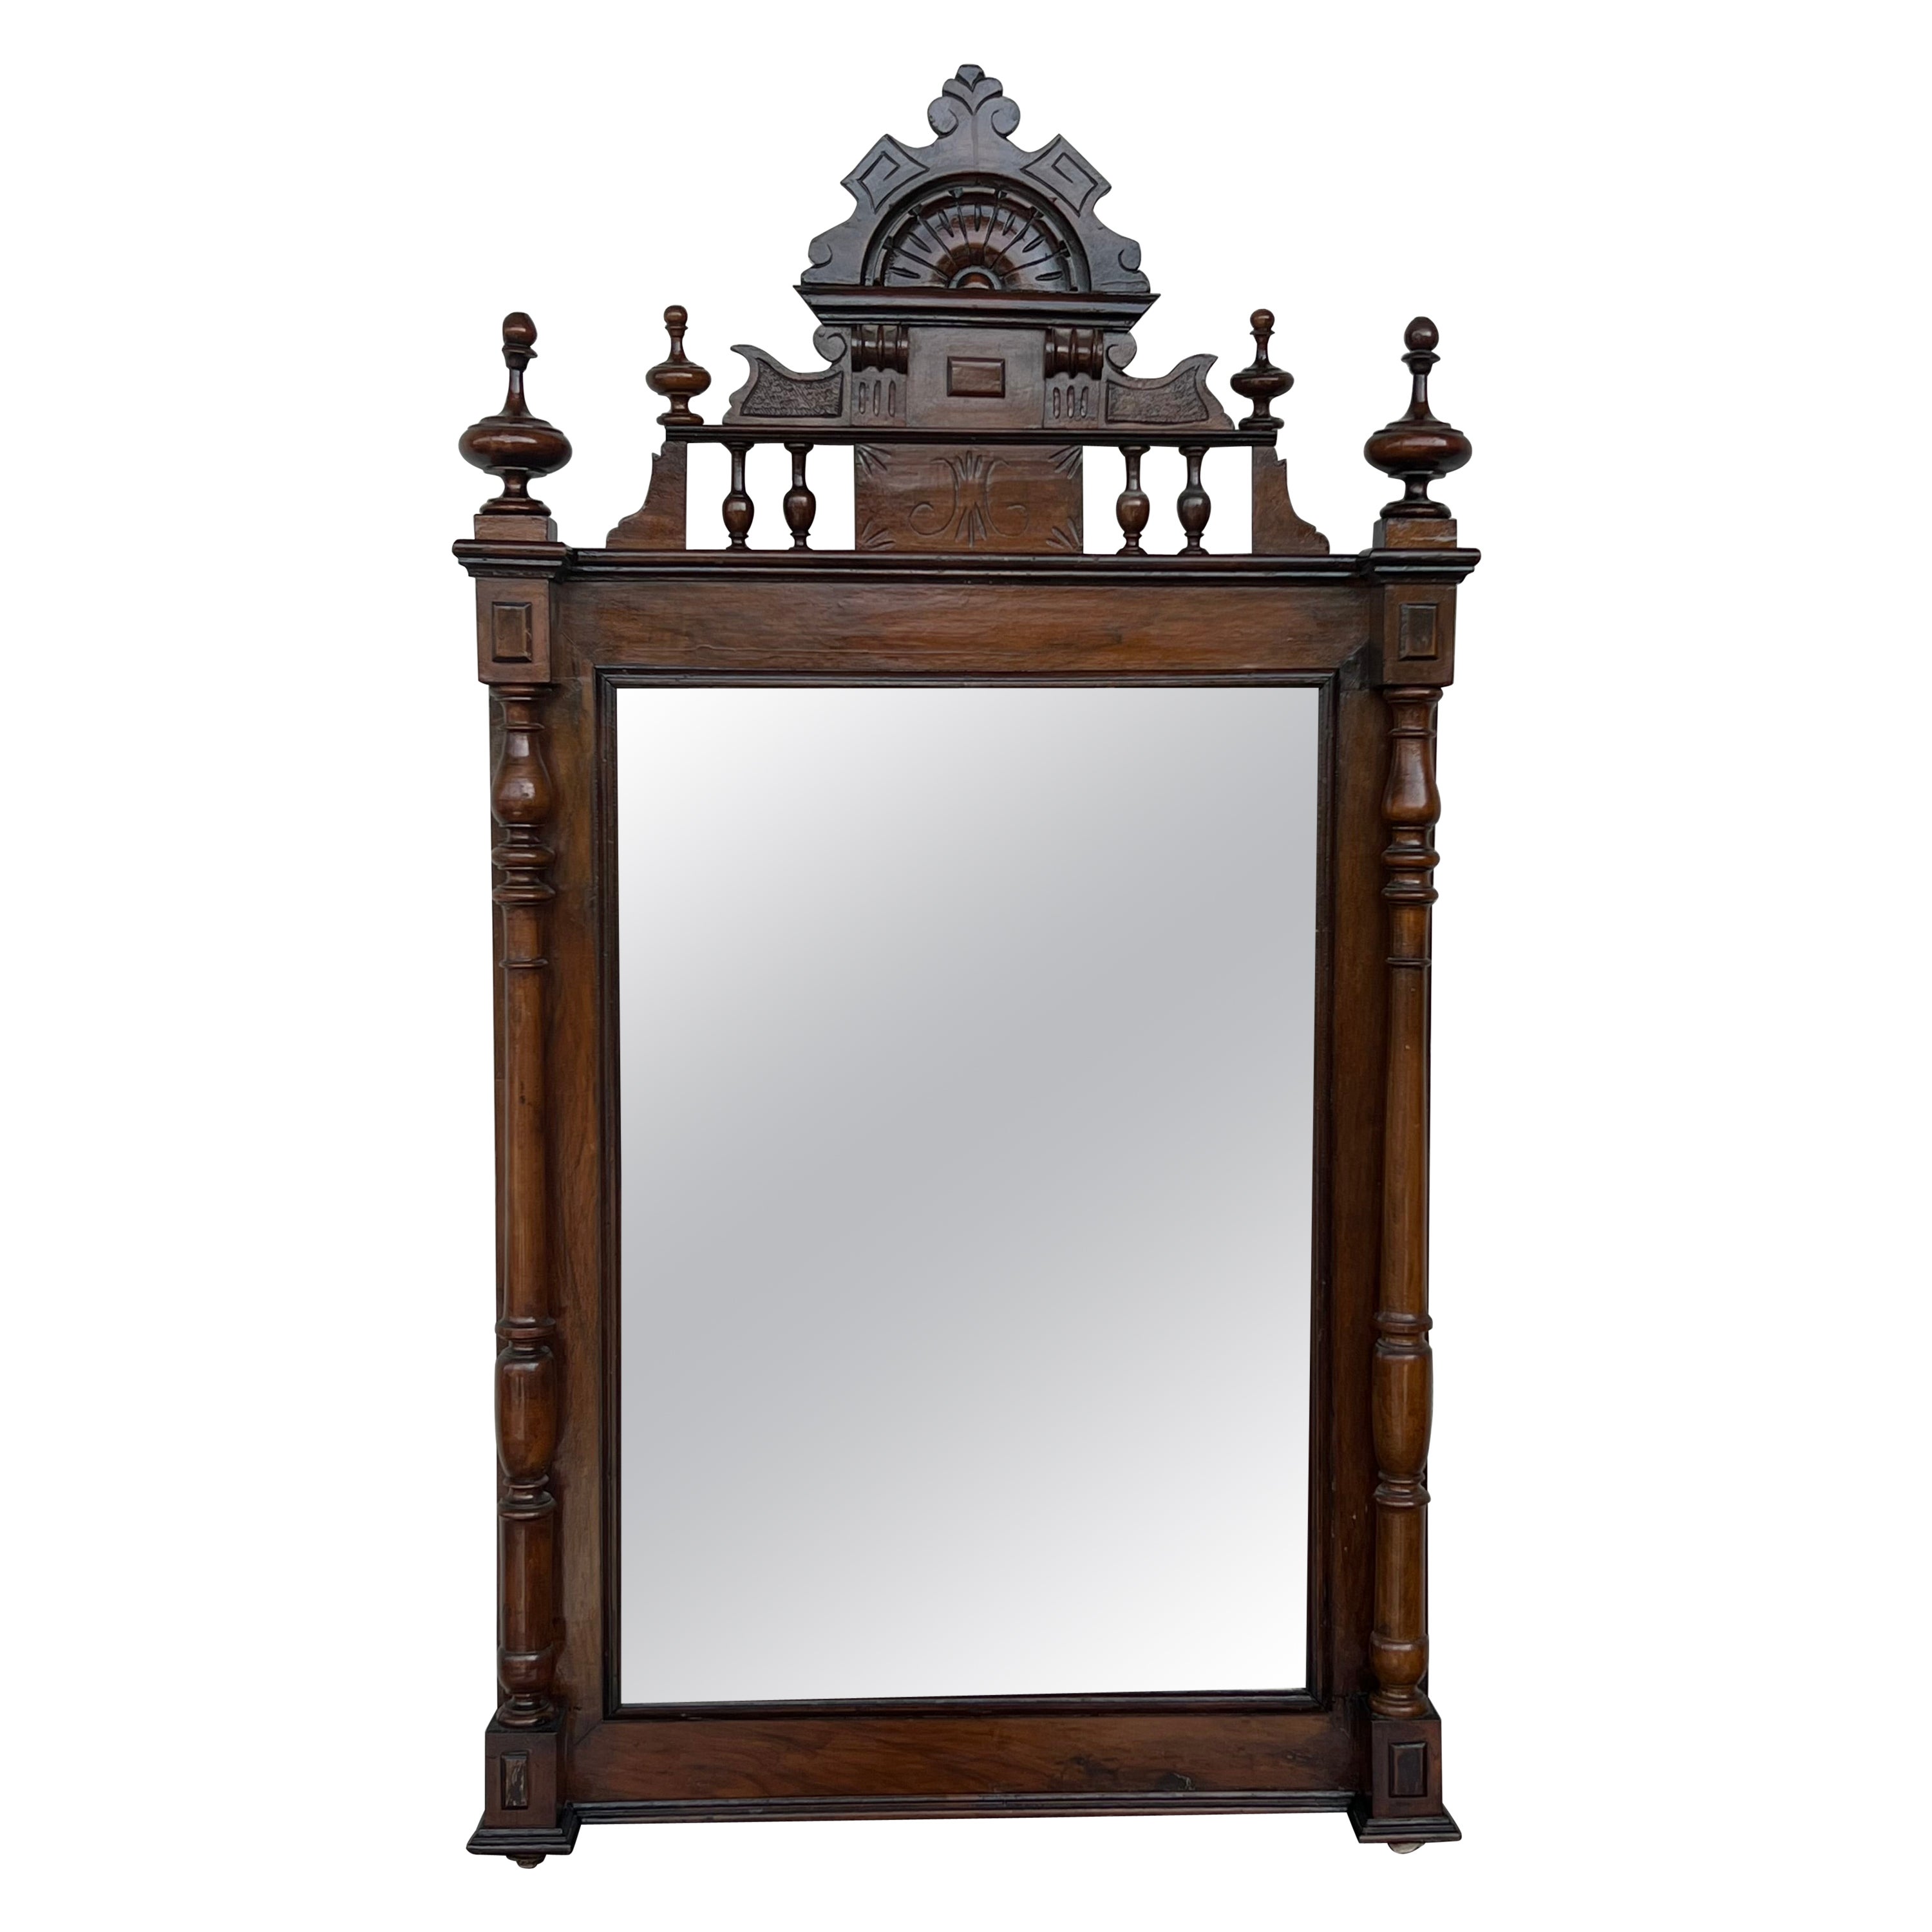 Early 20th French Ebonized Mirror with Turned Columns and High Carved Details